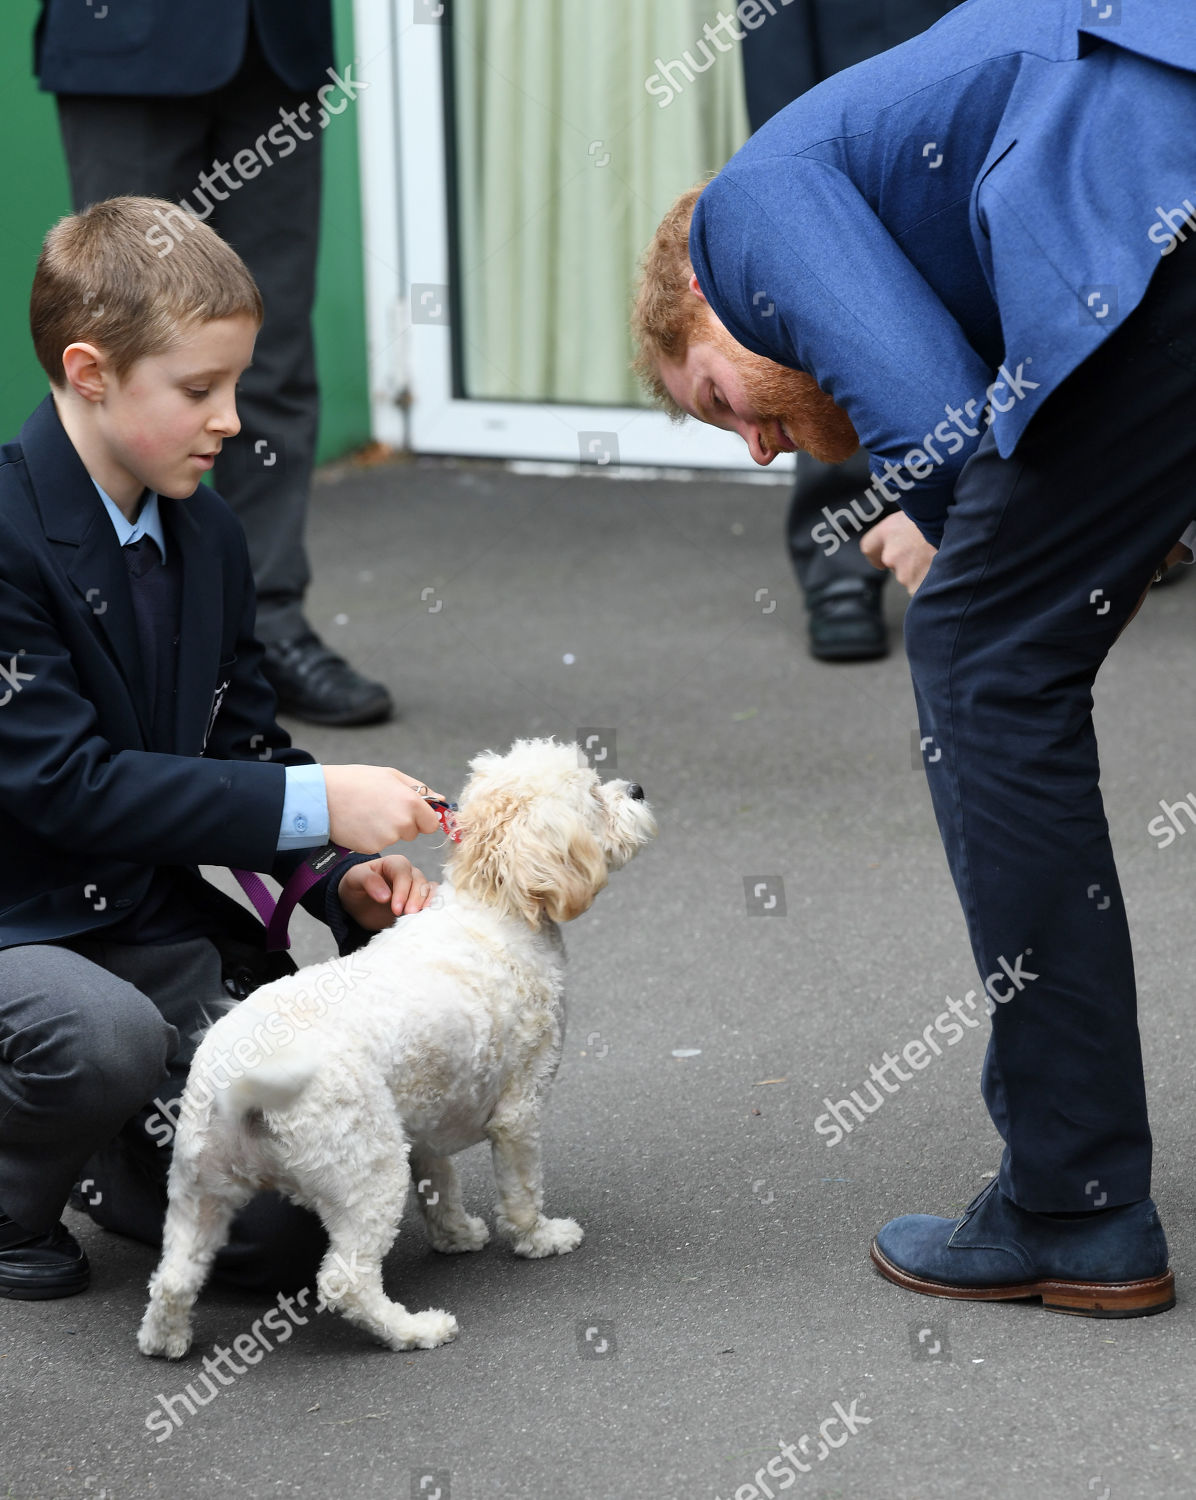 prince-harry-visits-st-vincents-catholic-primary-school-for-commonwealth-canopy-and-woodland-trust-tree-planting-ceremony-london-uk-shutterstock-editorial-10160984z.jpg